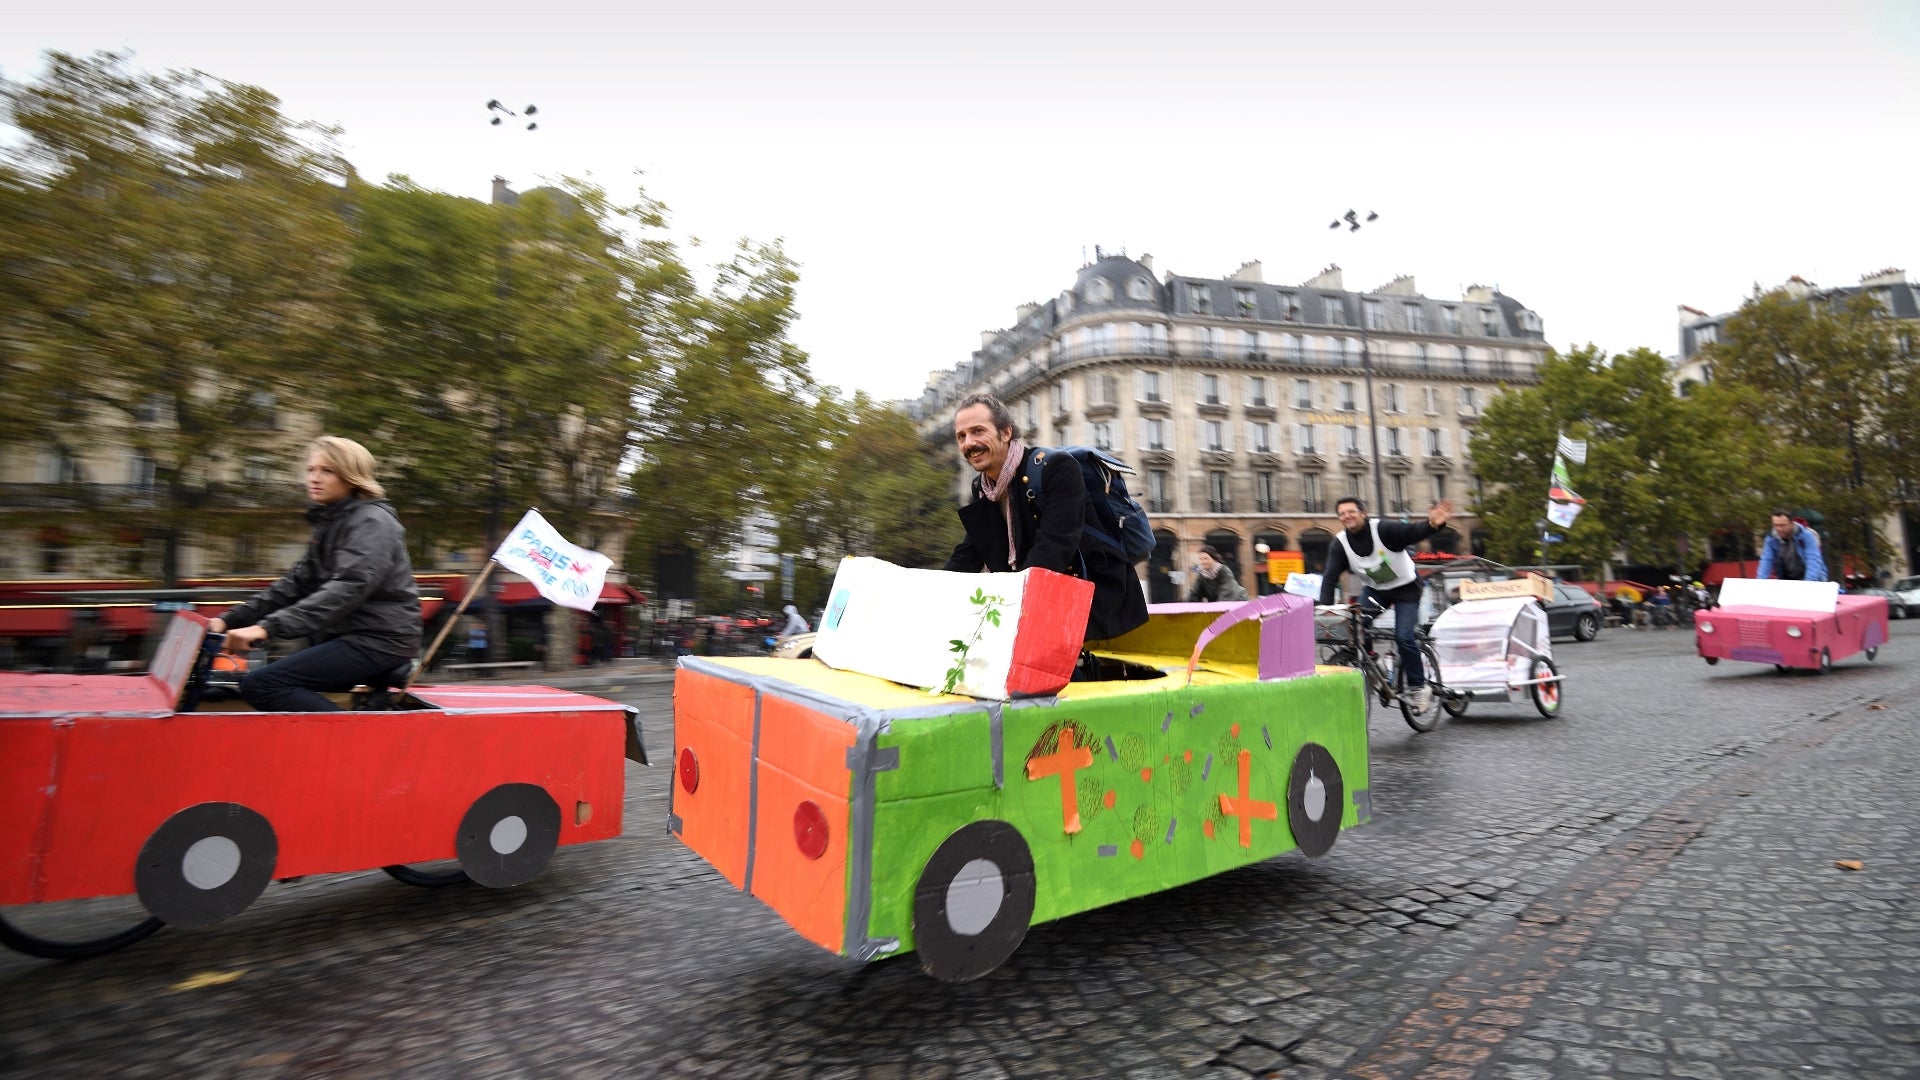 Paris Just Celebrated a ‘Day Without Cars’